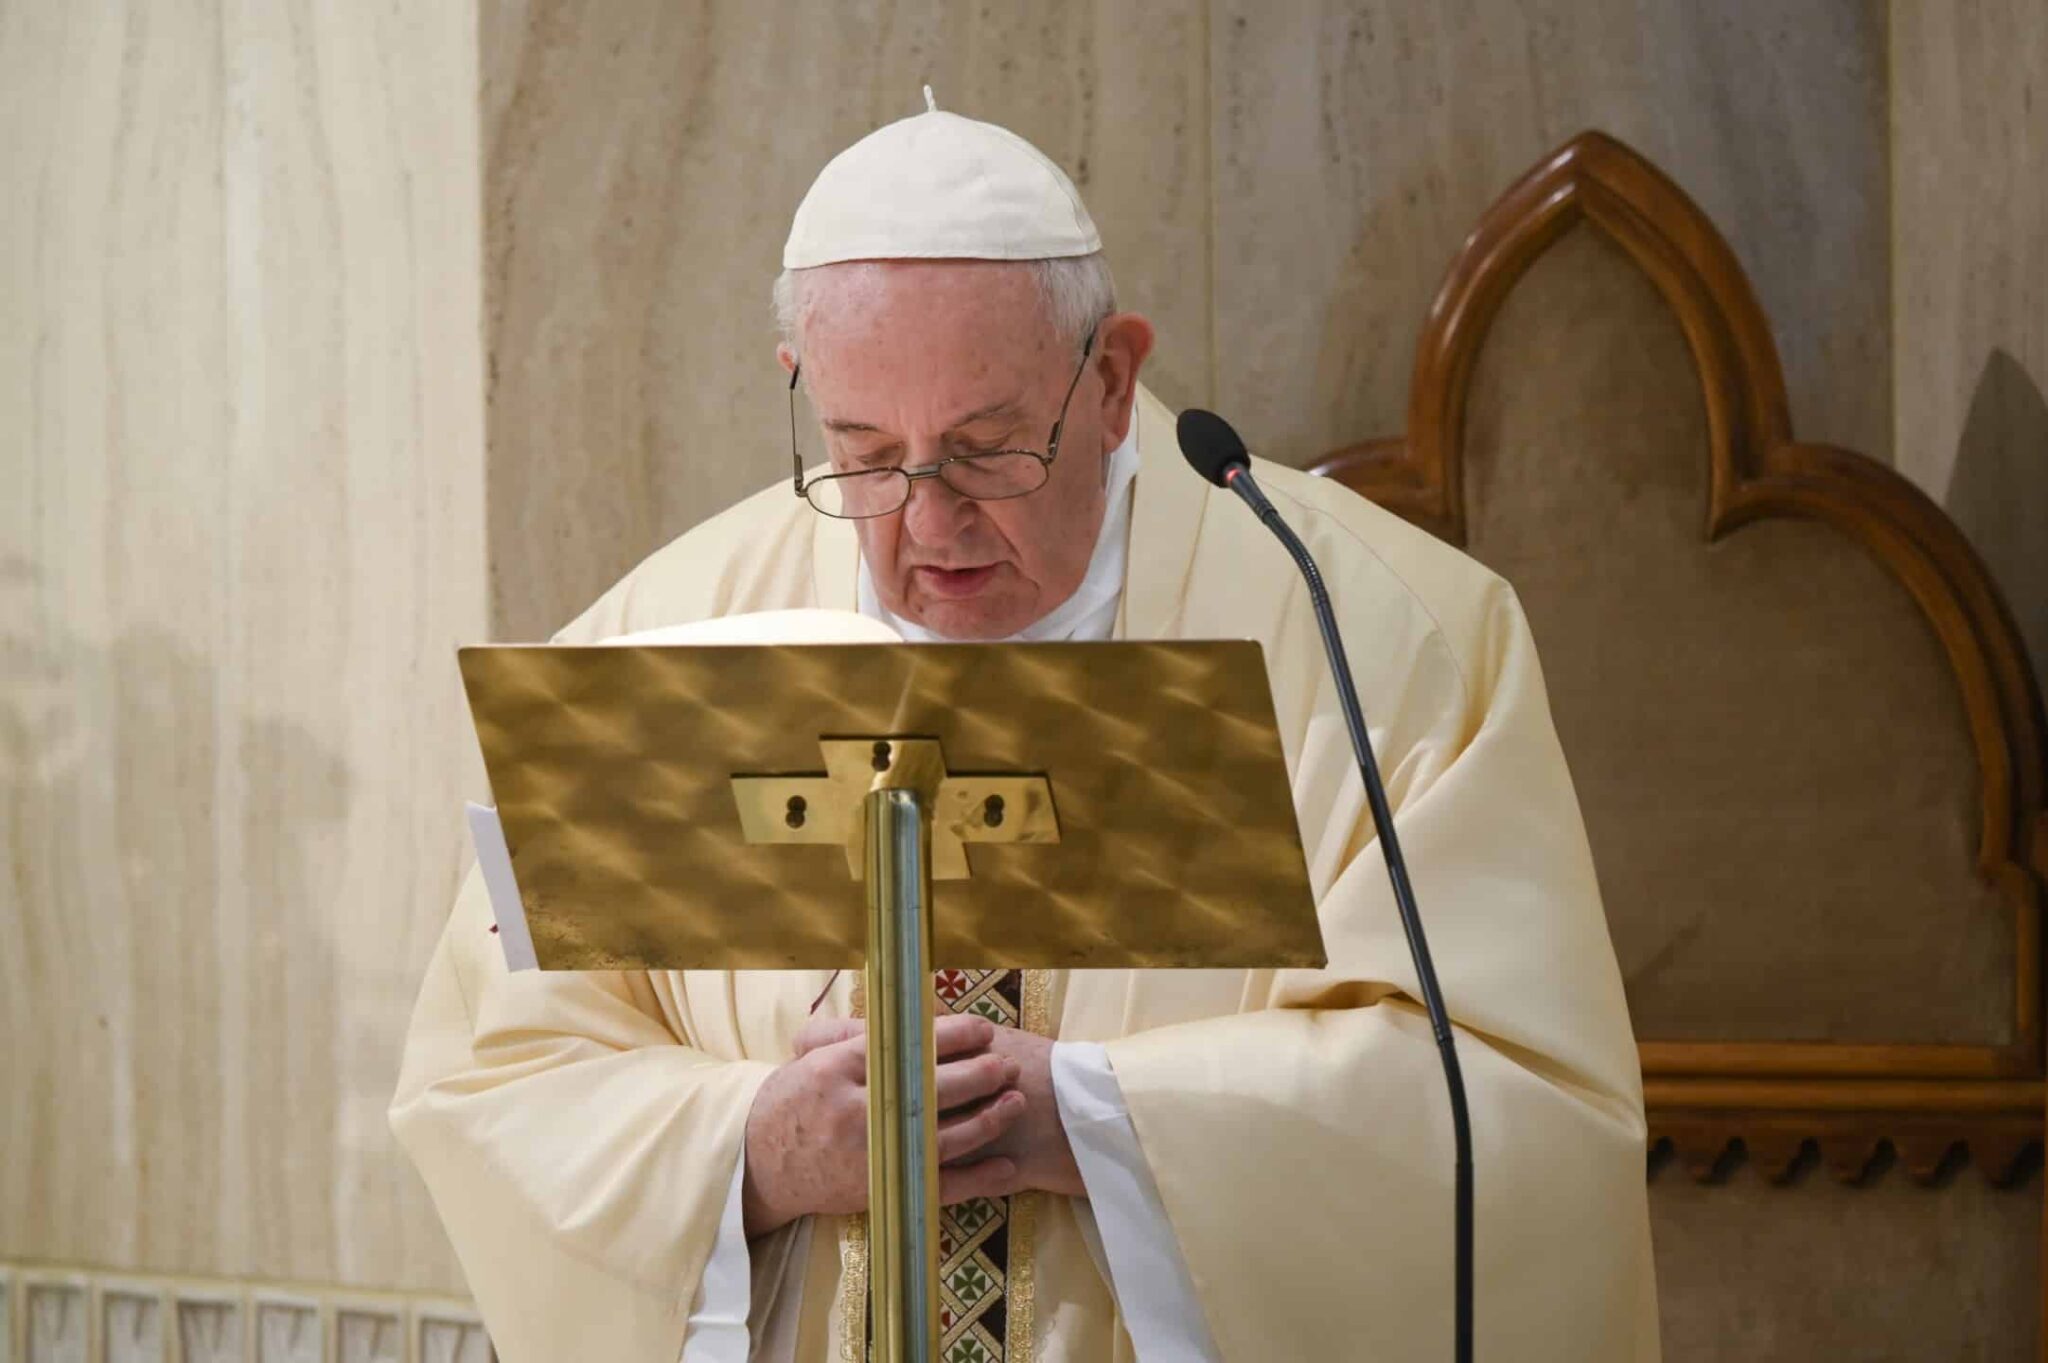 The Pope during morning Mass at the Vatican